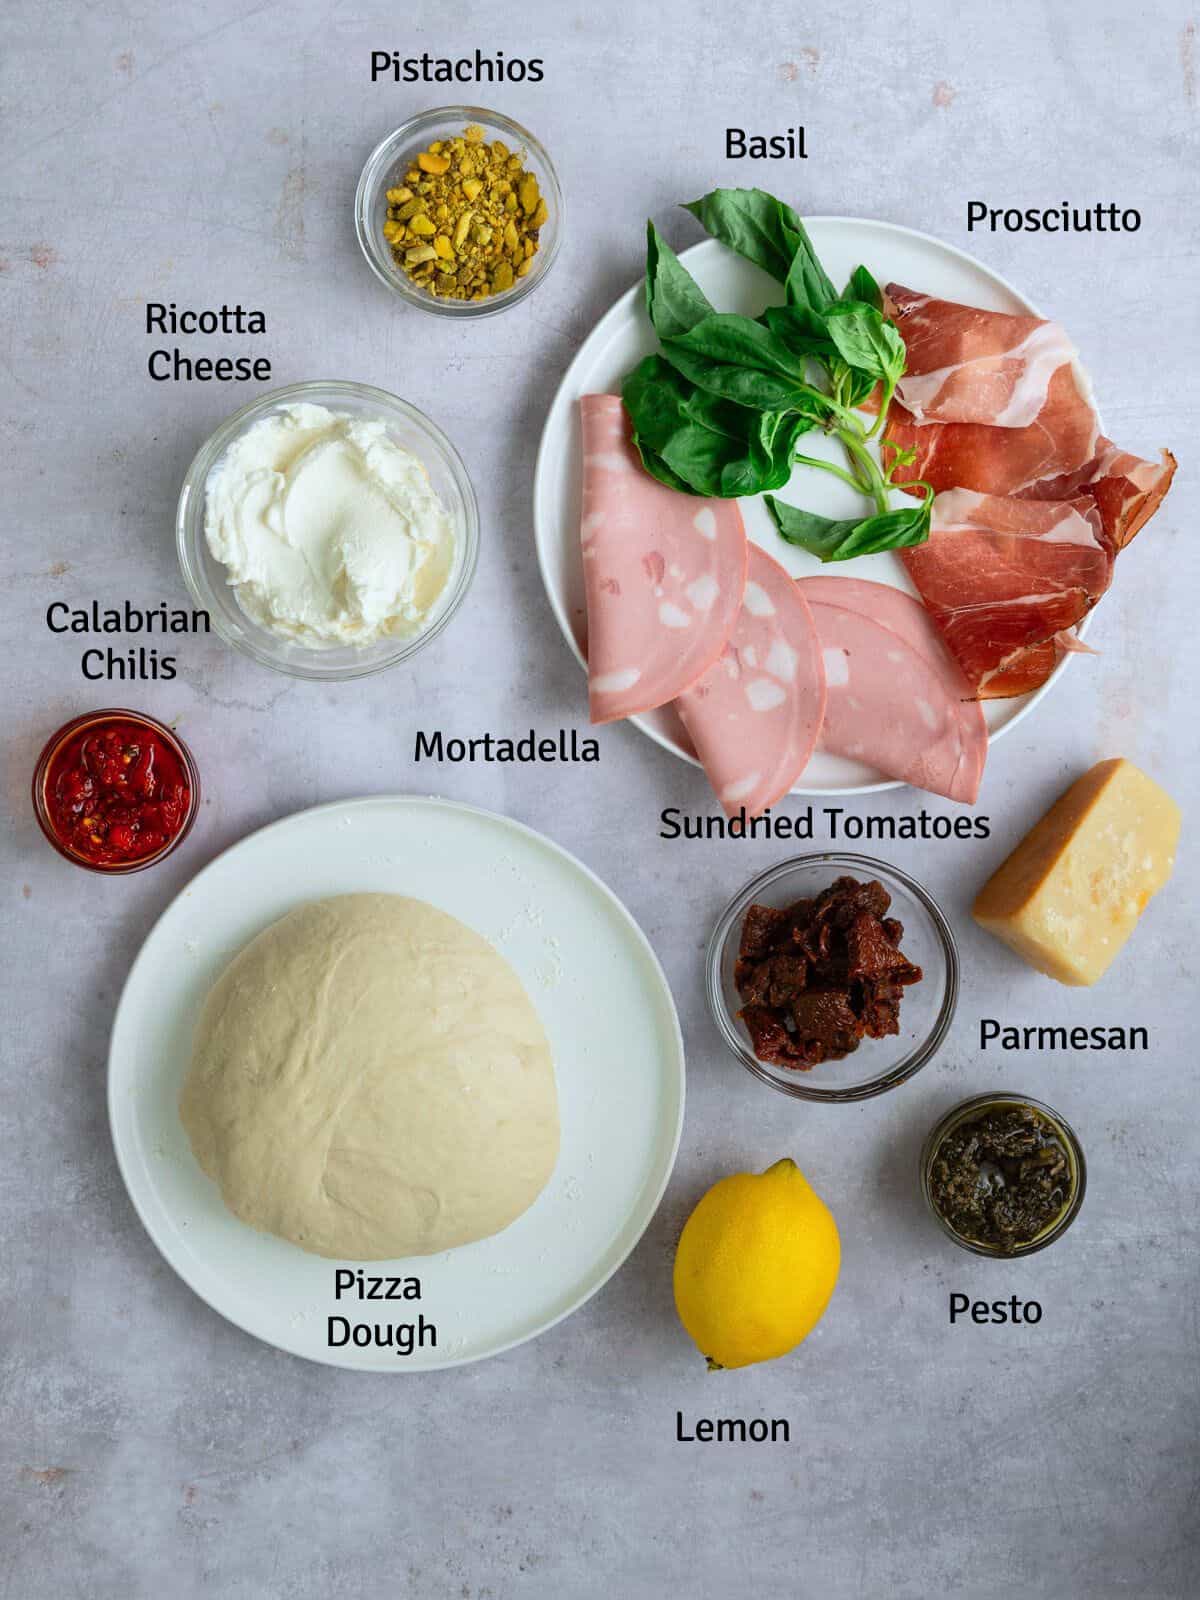 Ingredients for pizza dough sandwich, including fillings with ricotta cheese and meats, sundried tomatoes and pesto.